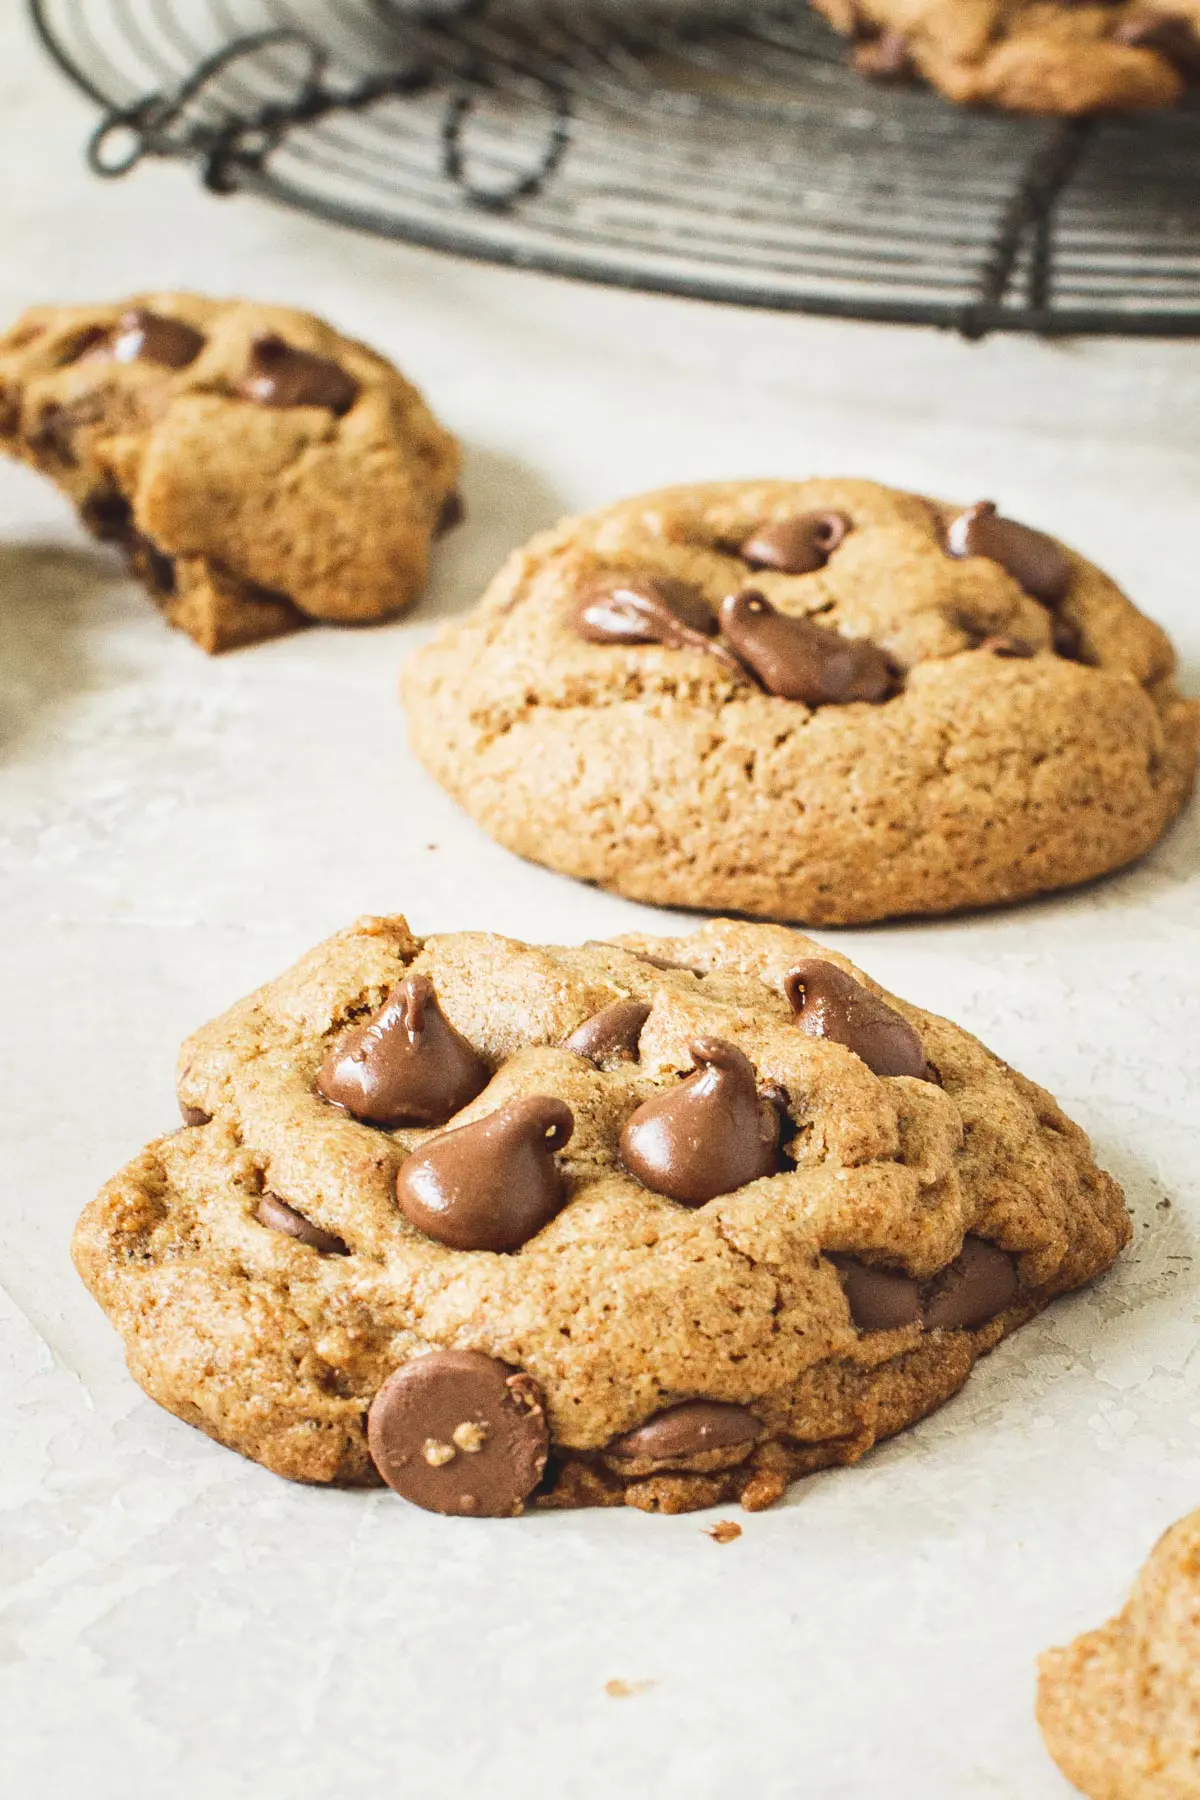 Two whole wheat chocolate chip cookies.